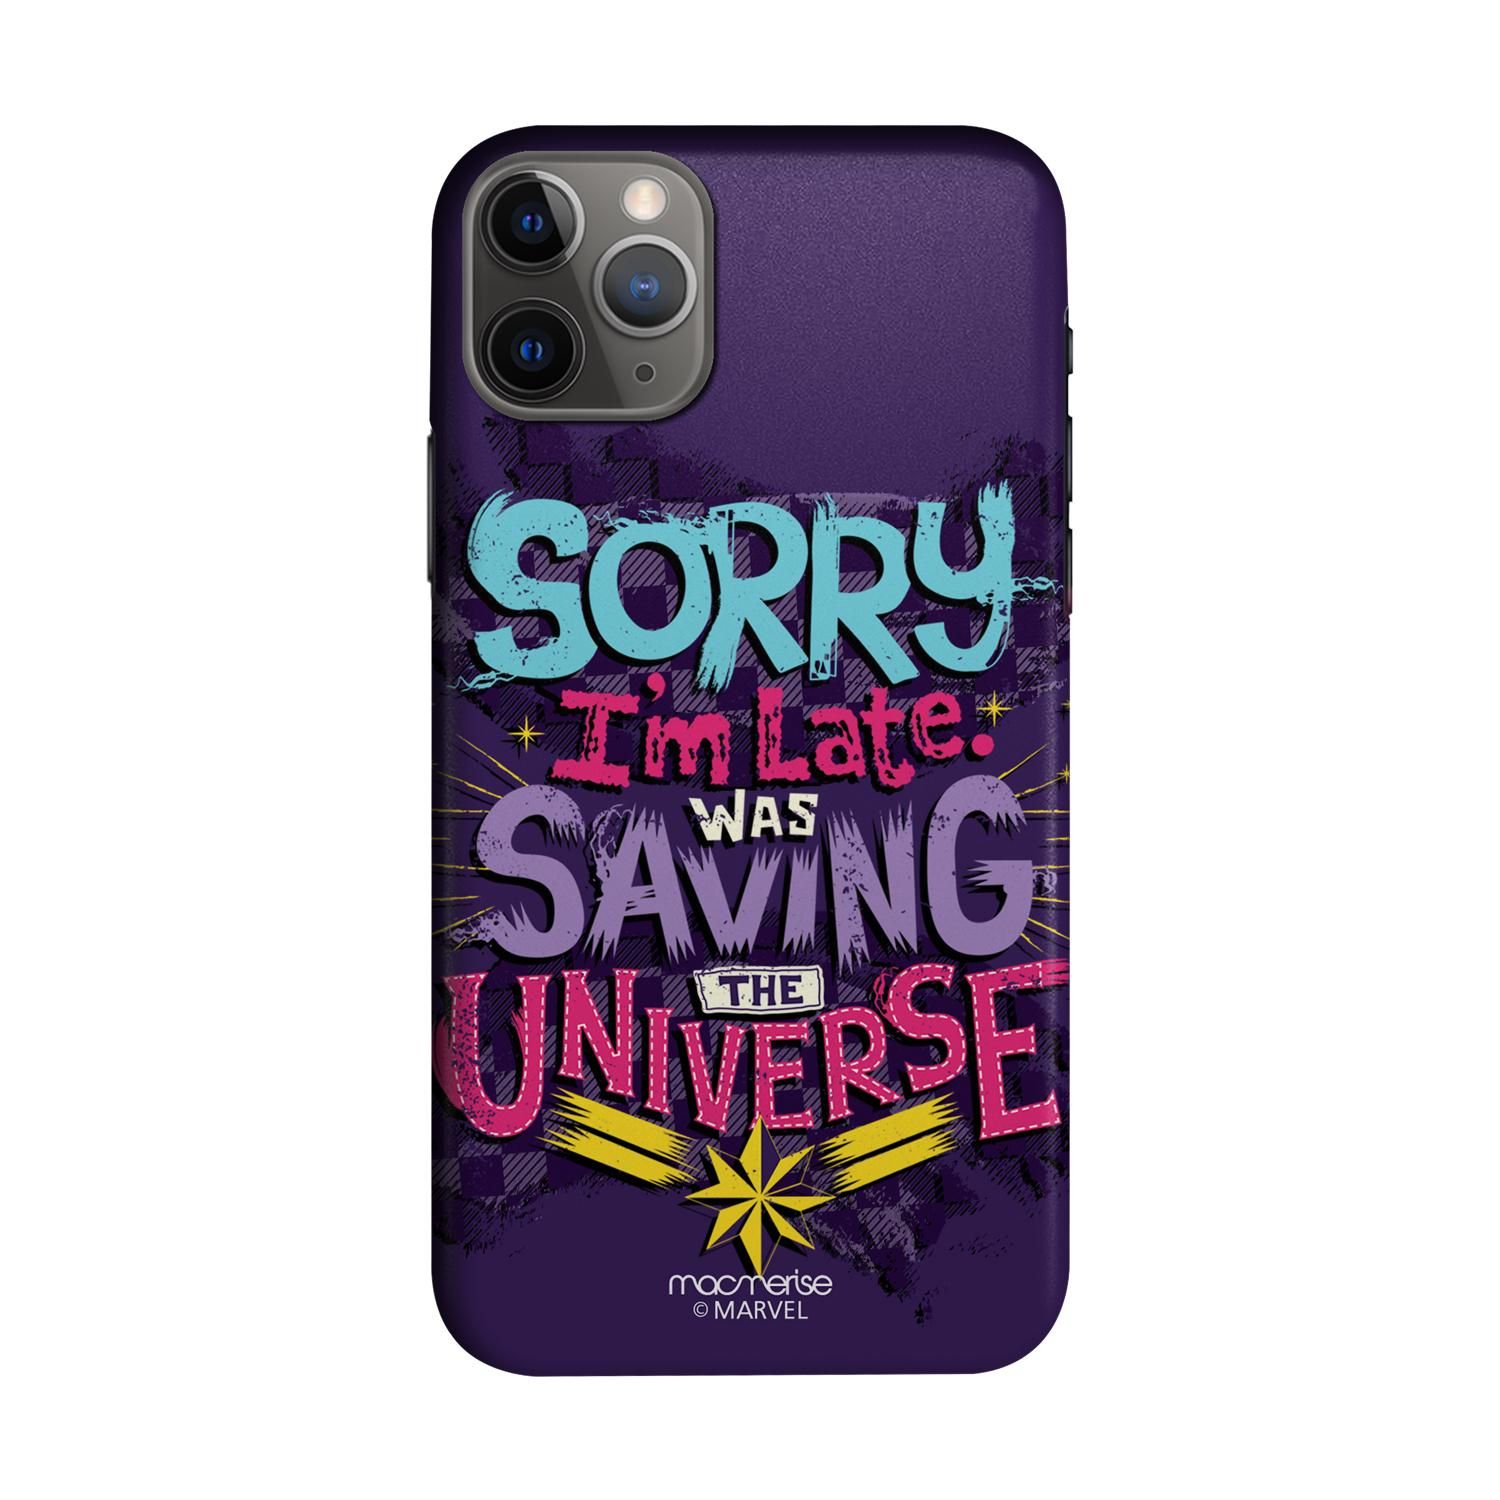 Buy Saving The Universe - Sleek Phone Case for iPhone 11 Pro Max Online